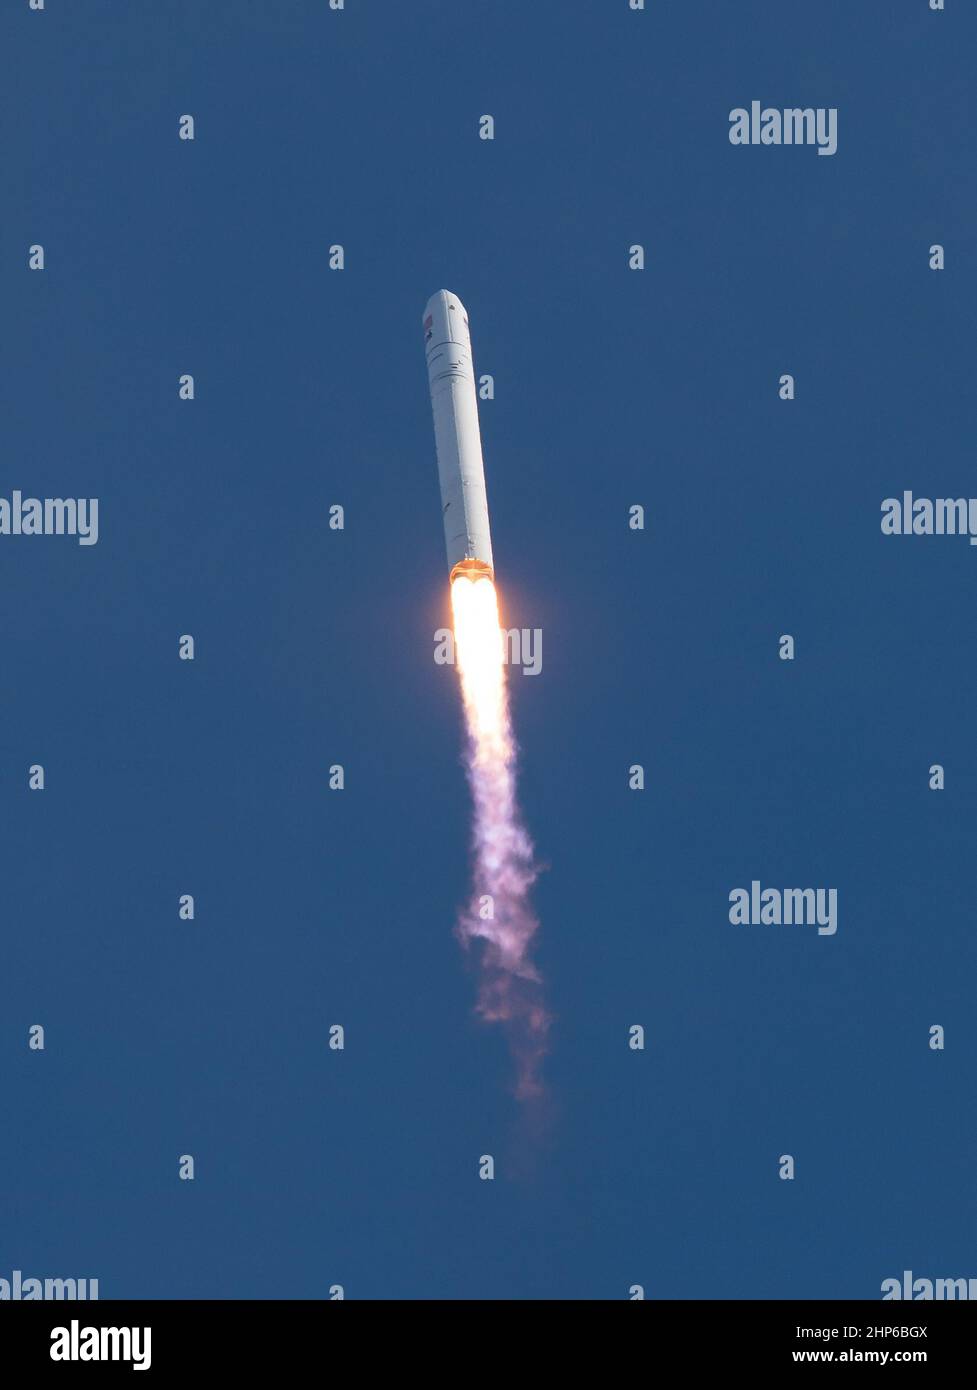 The Northrop Grumman Antares rocket, with Cygnus resupply spacecraft onboard, launches from Pad-0A, Saturday, Feb. 15, 2020 at NASA's Wallops Flight Facility in Virginia. Northrop Grumman's 13th contracted cargo resupply mission for NASA to the International Space Station will deliver more than 7,500 pounds of science and research, crew supplies and vehicle hardware to the orbital laboratory and its crew. Stock Photo